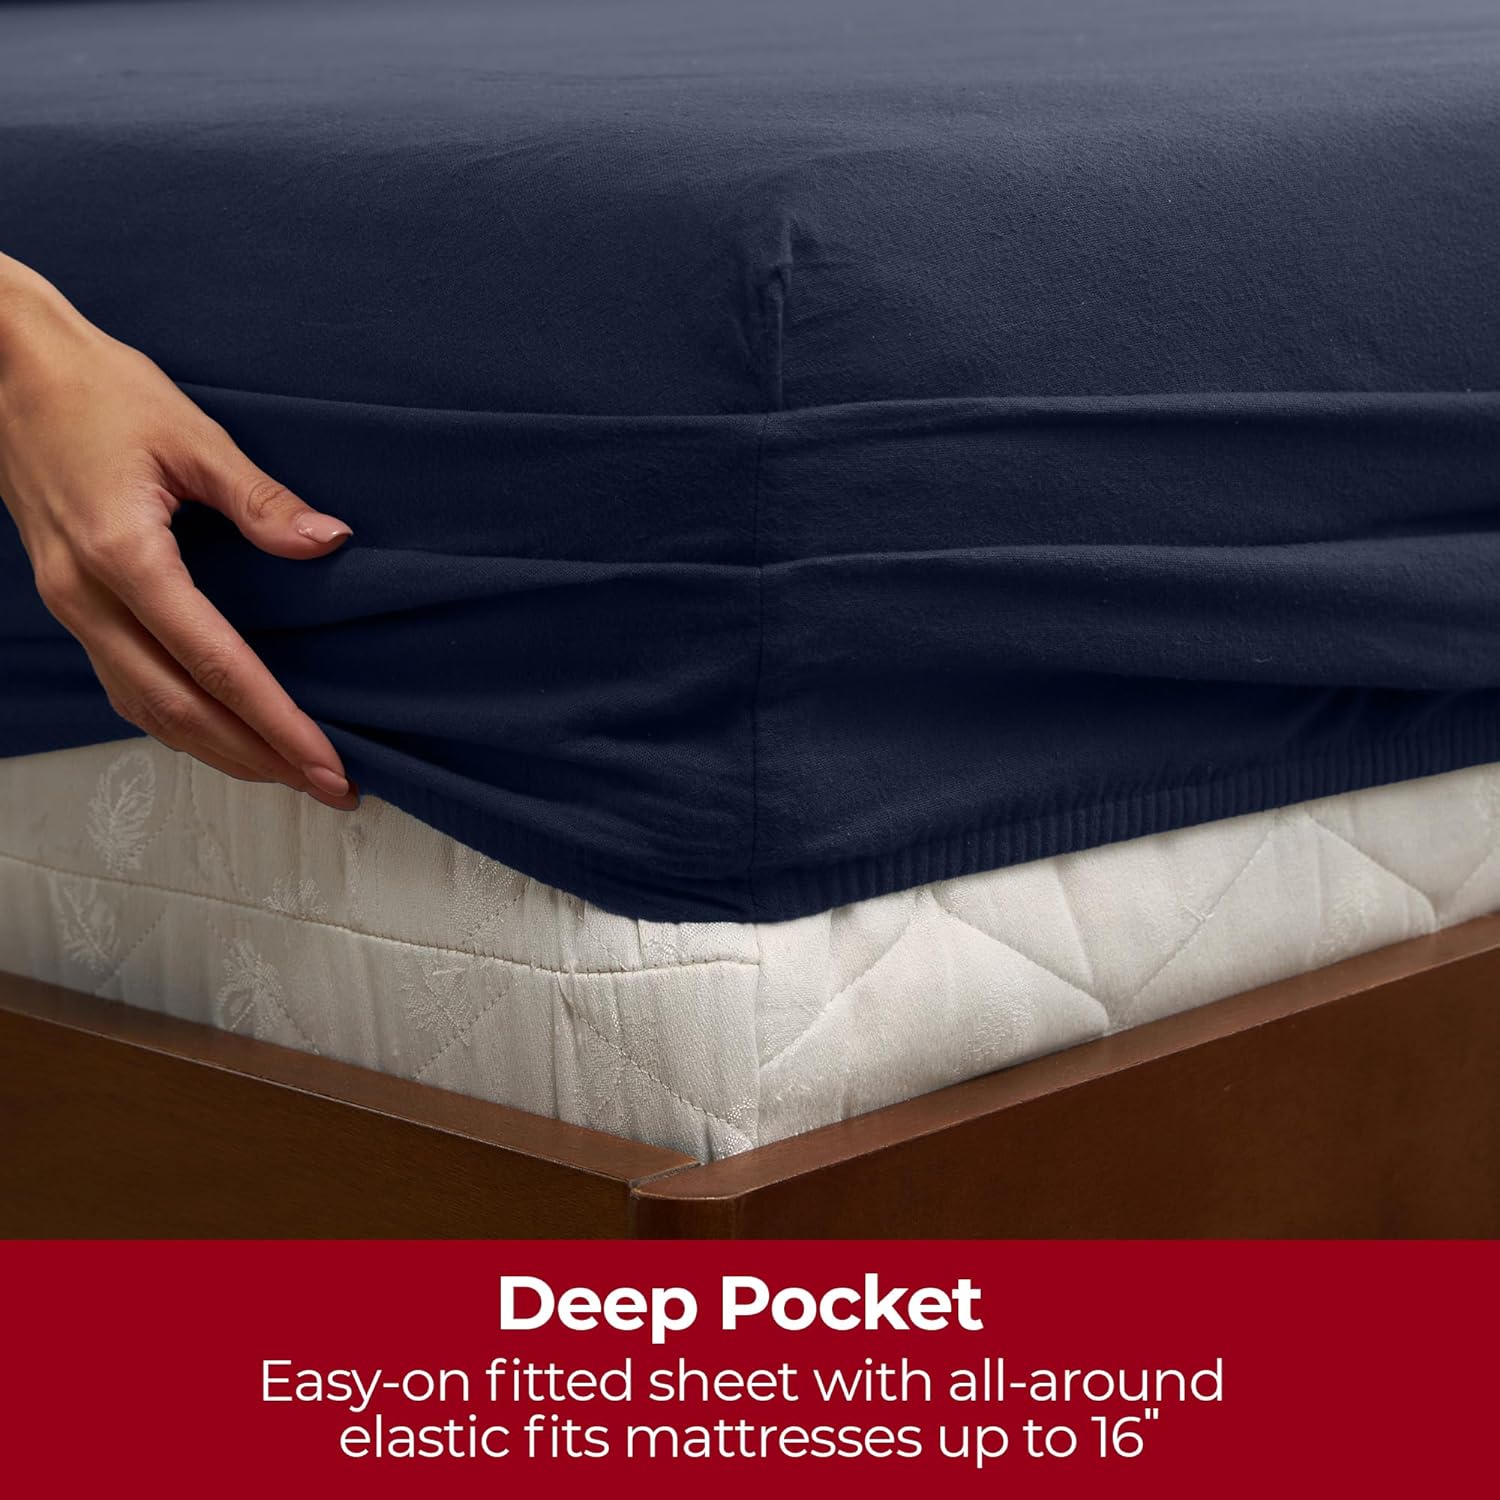 Mellanni 100% Cotton Flannel Full Sheets Set - Double Brushed for Extra Softness & Warmth - Luxury Lightweight Navy Blue Sheets Set - Deep Pocket Fitted Sheet up to 16 inch - 4 PC Set (Full, Navy) 